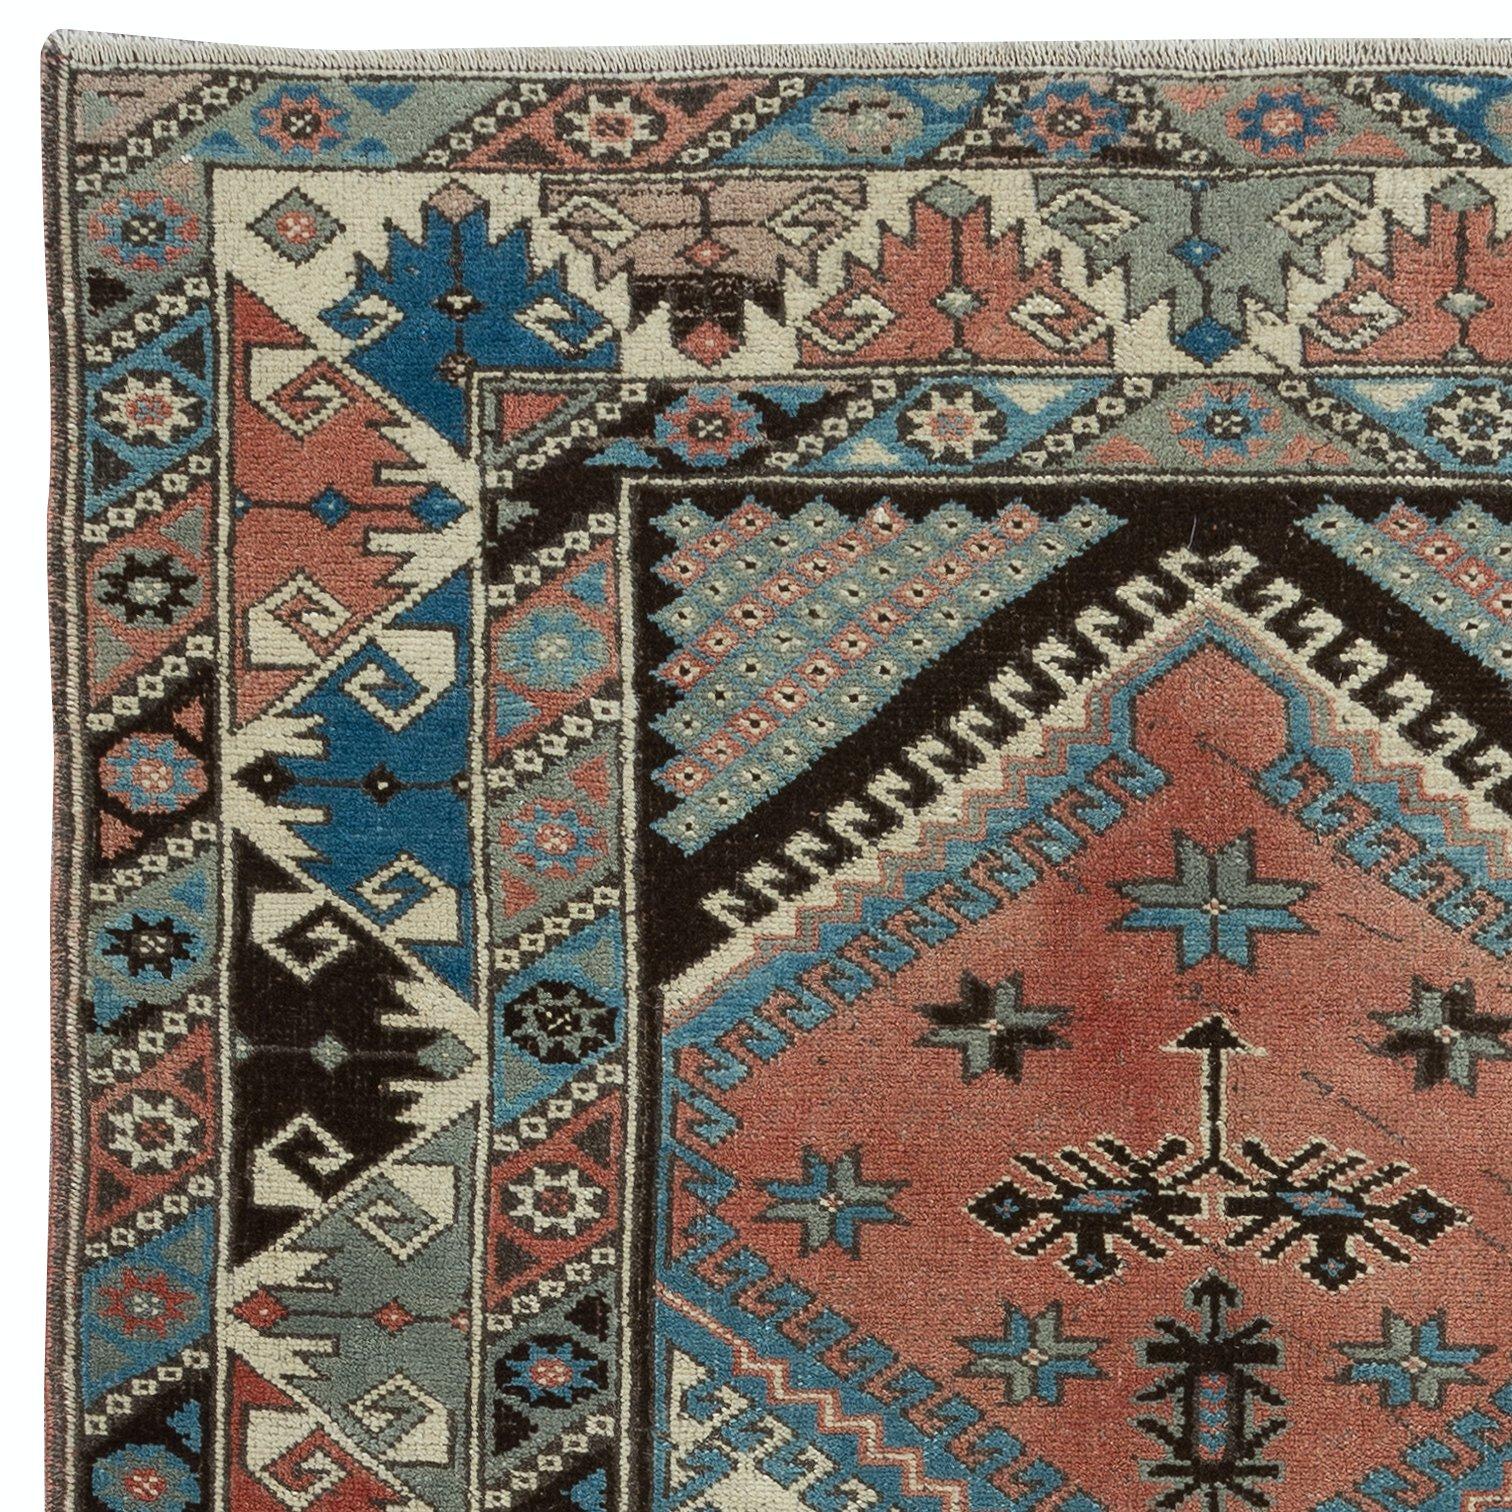 Hand-Knotted 4x6 Ft Unique Vintage Handmade Turkish Area Rug with Geometric Patters, All Wool For Sale